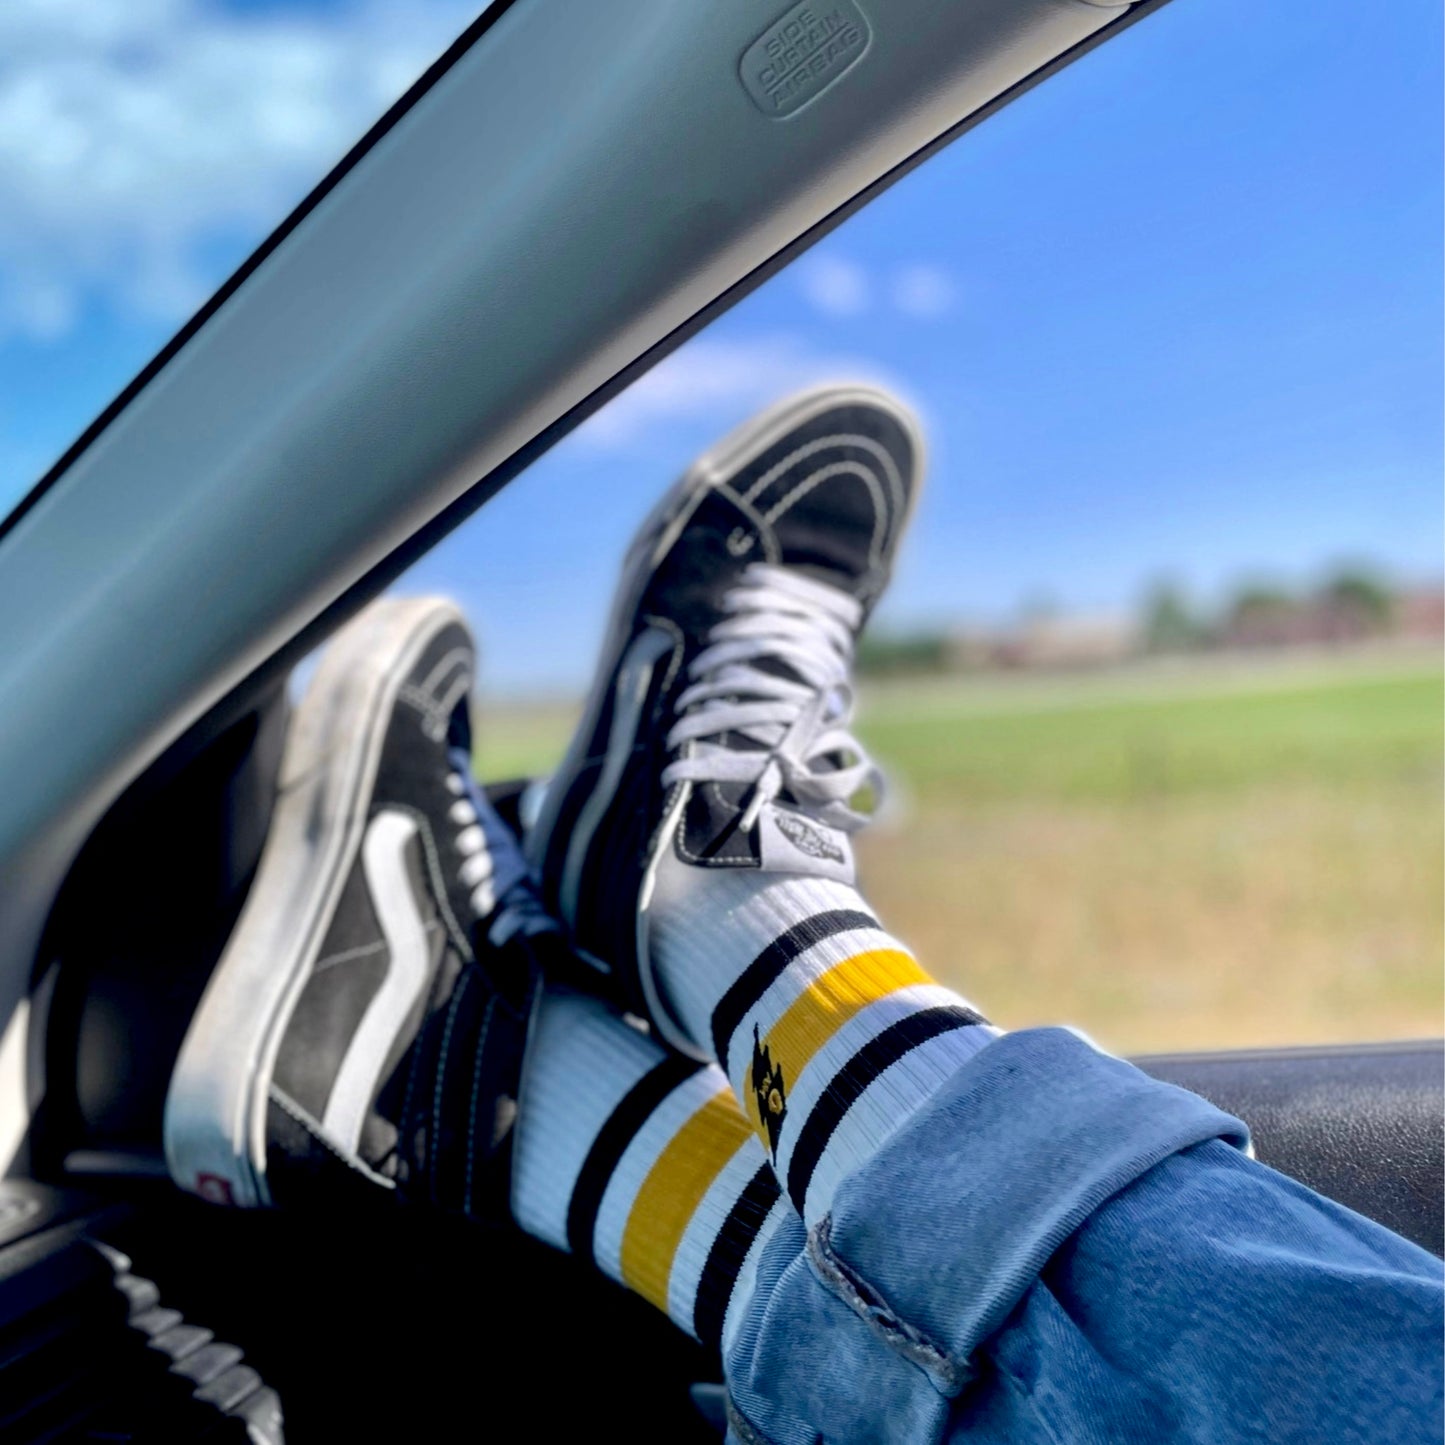 ELECTRIC VINTAGE -  CREW SOCKS *LIMITED EDITION*